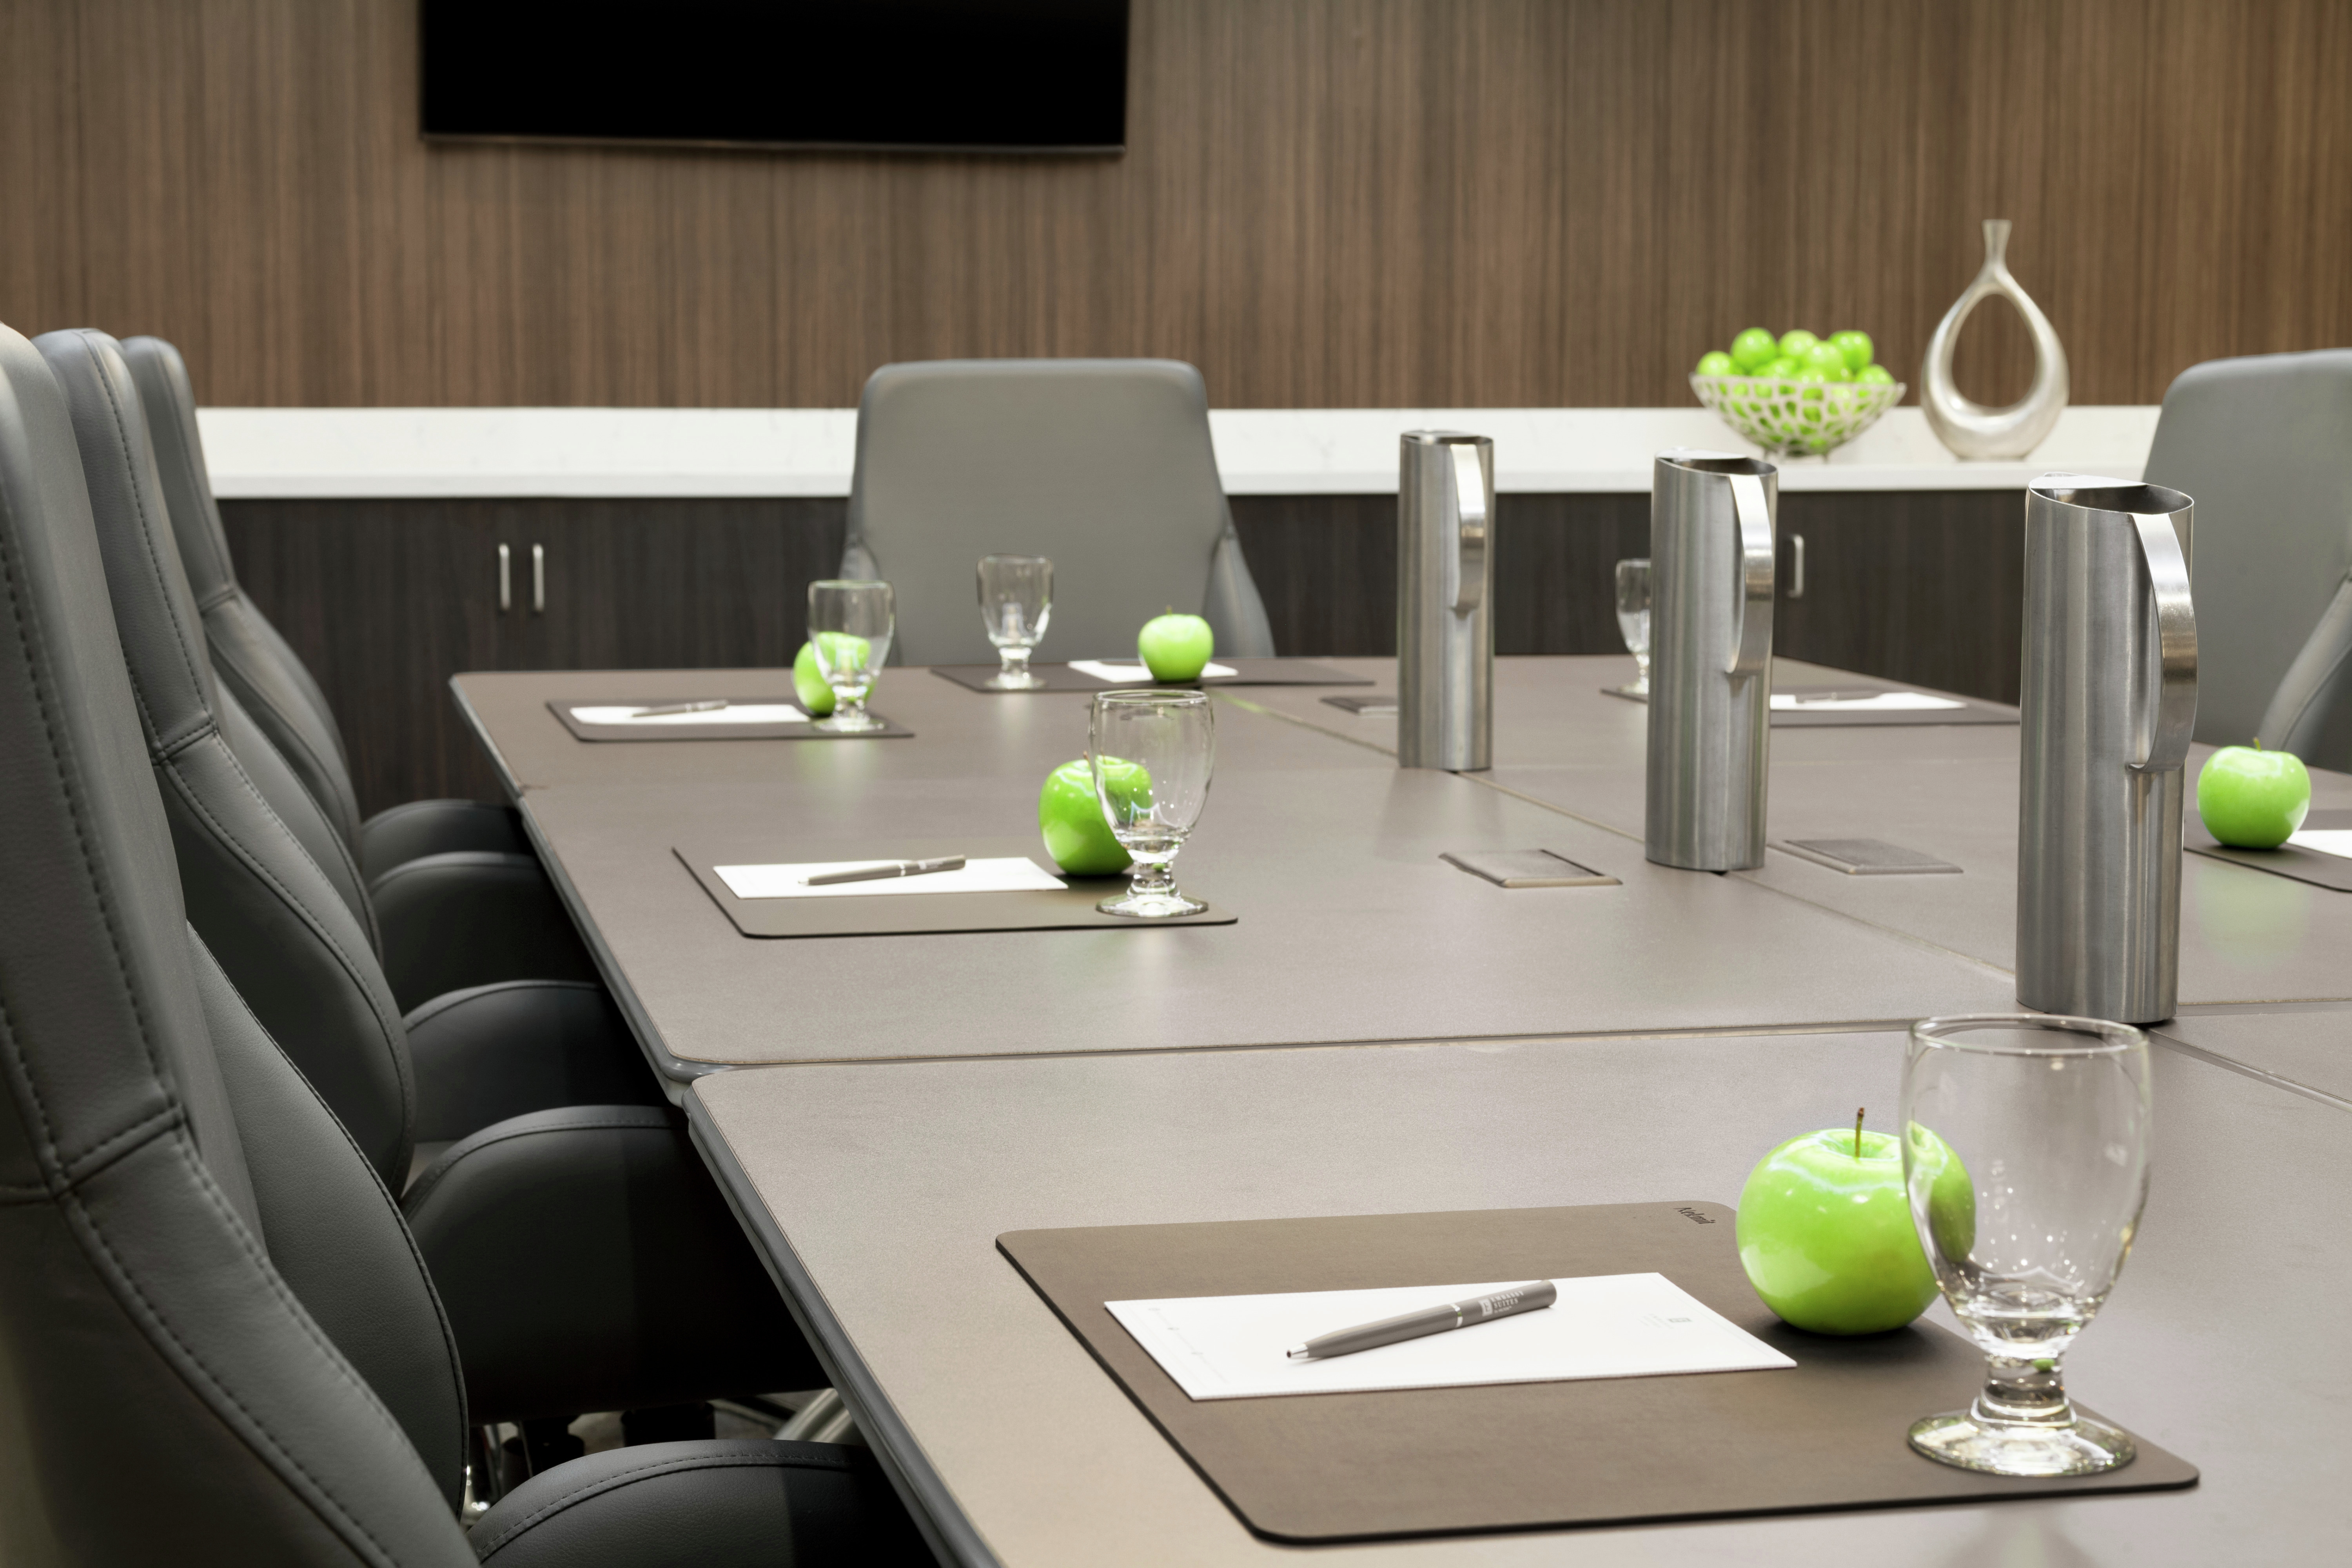 Boardroom with Tables, Chairs, Apples, and Glasses